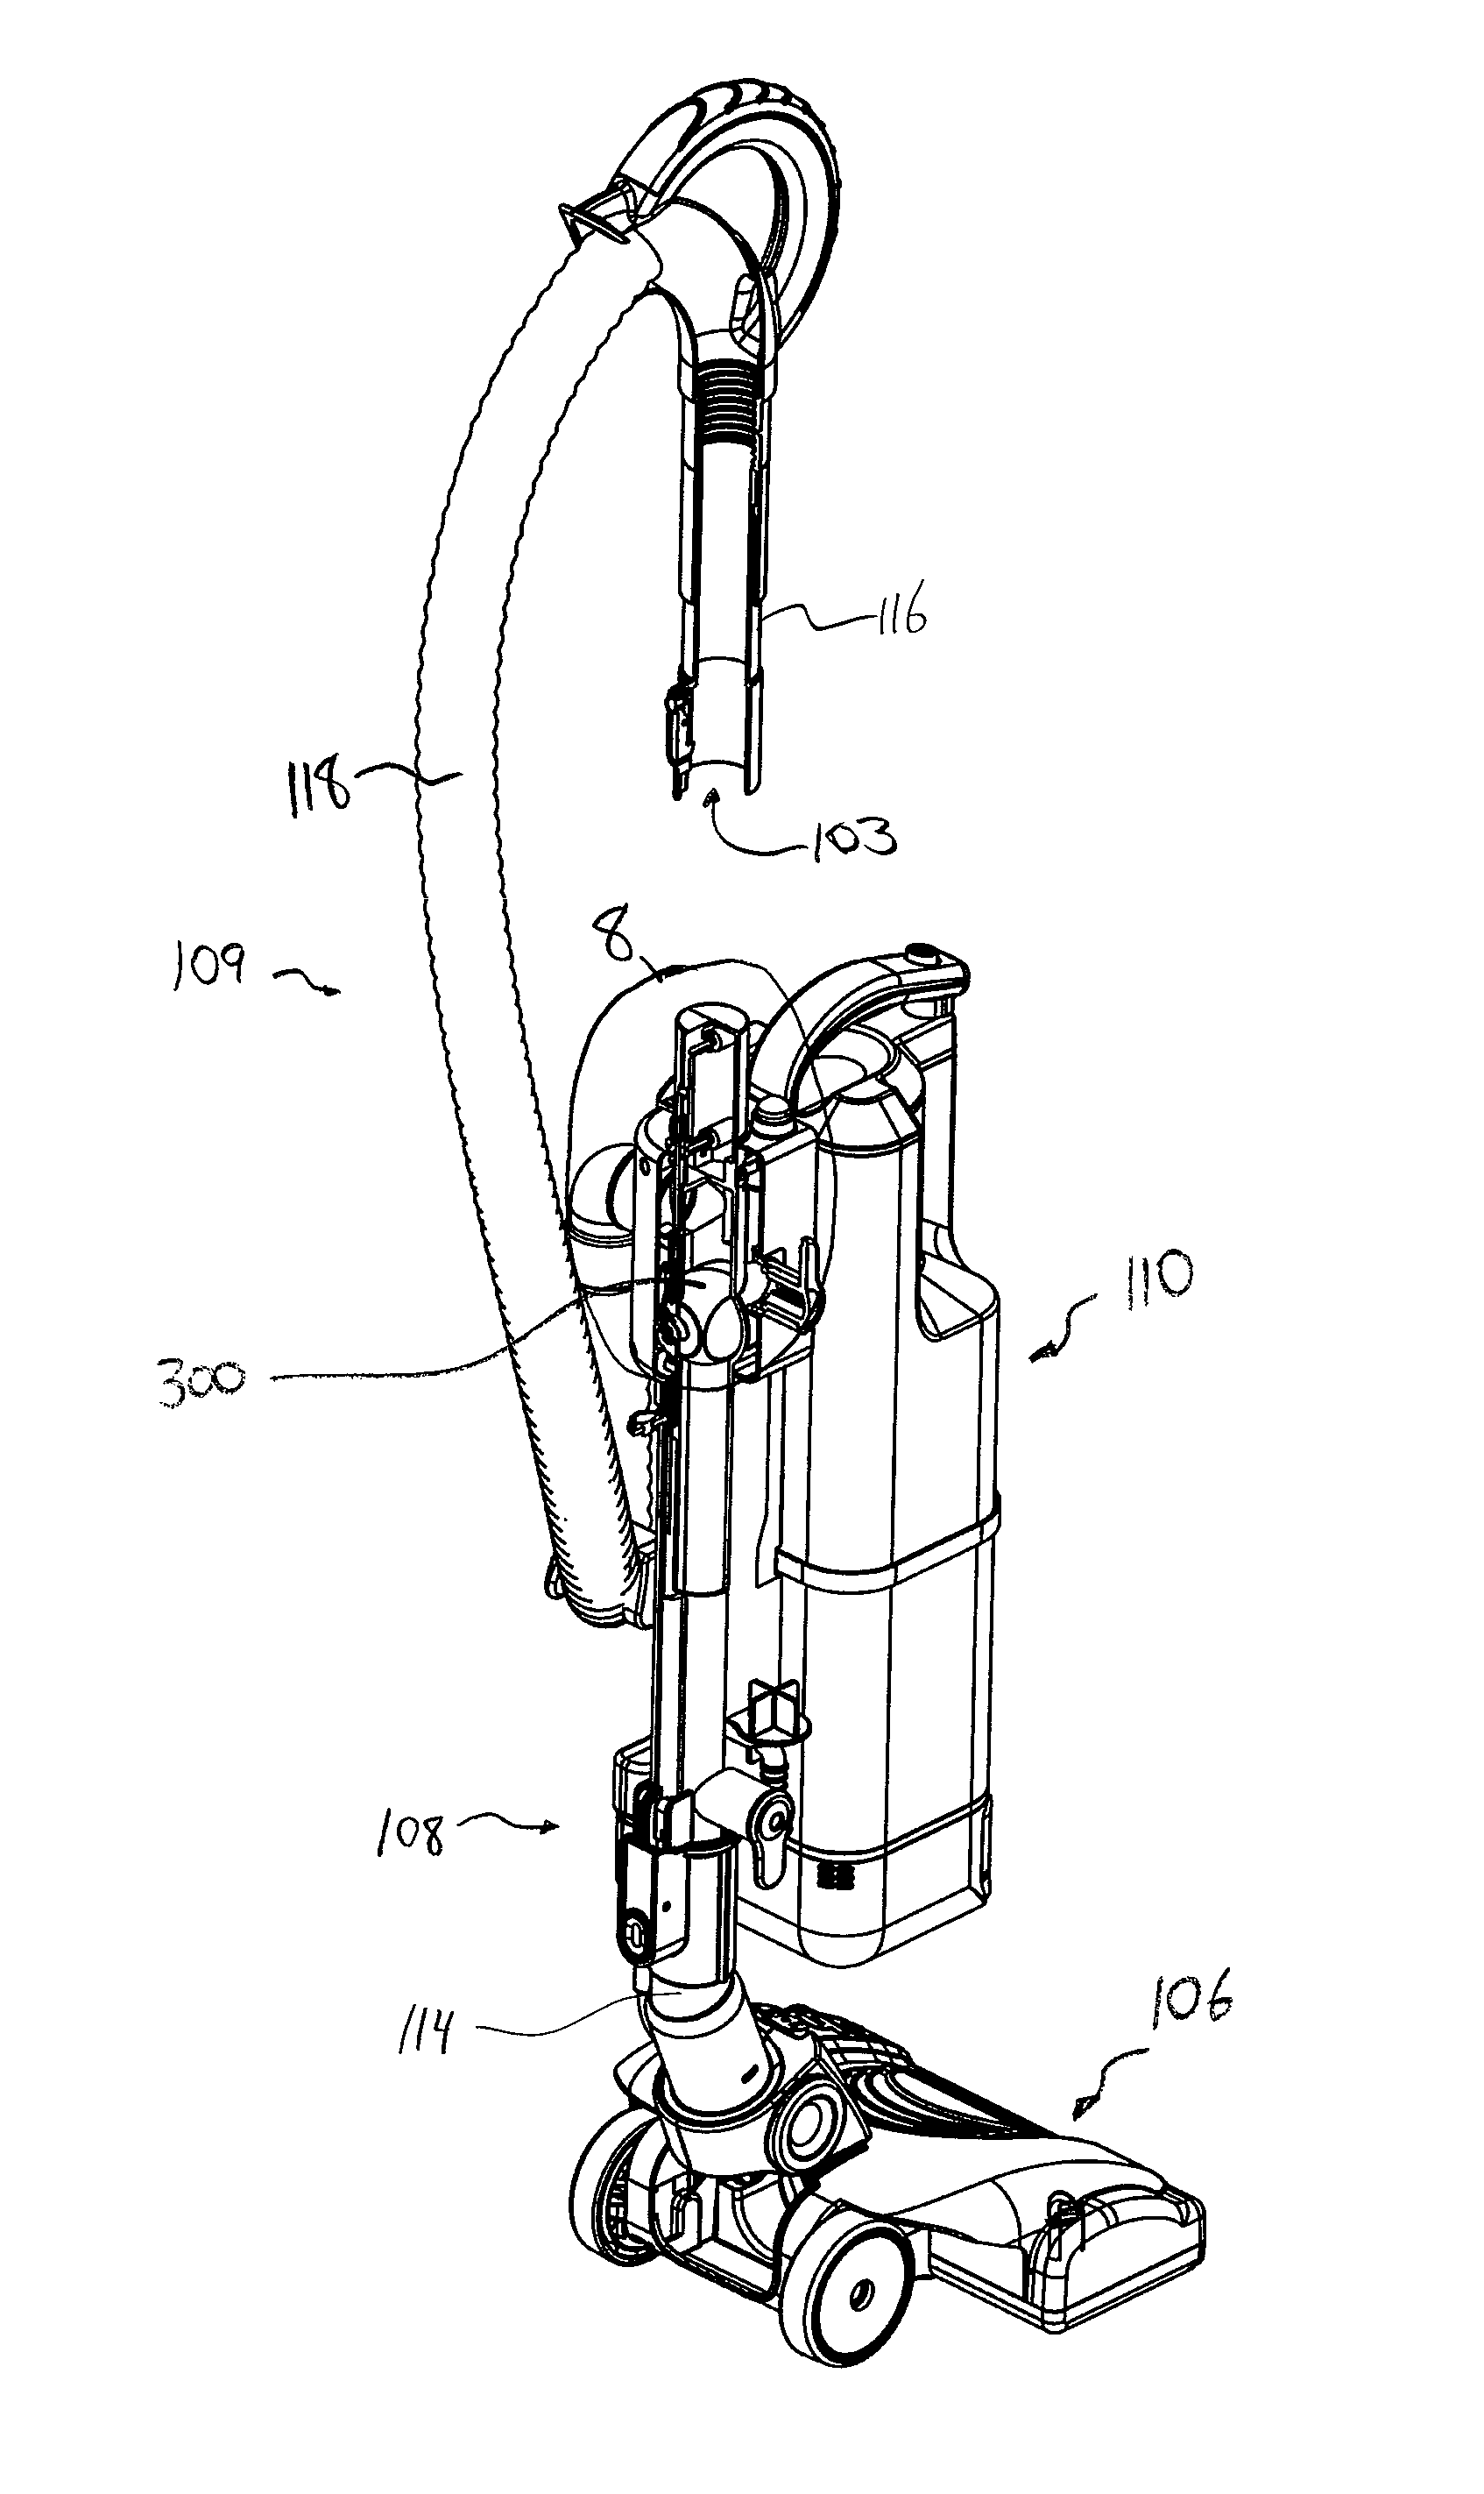 Valve for a surface cleaning apparatus